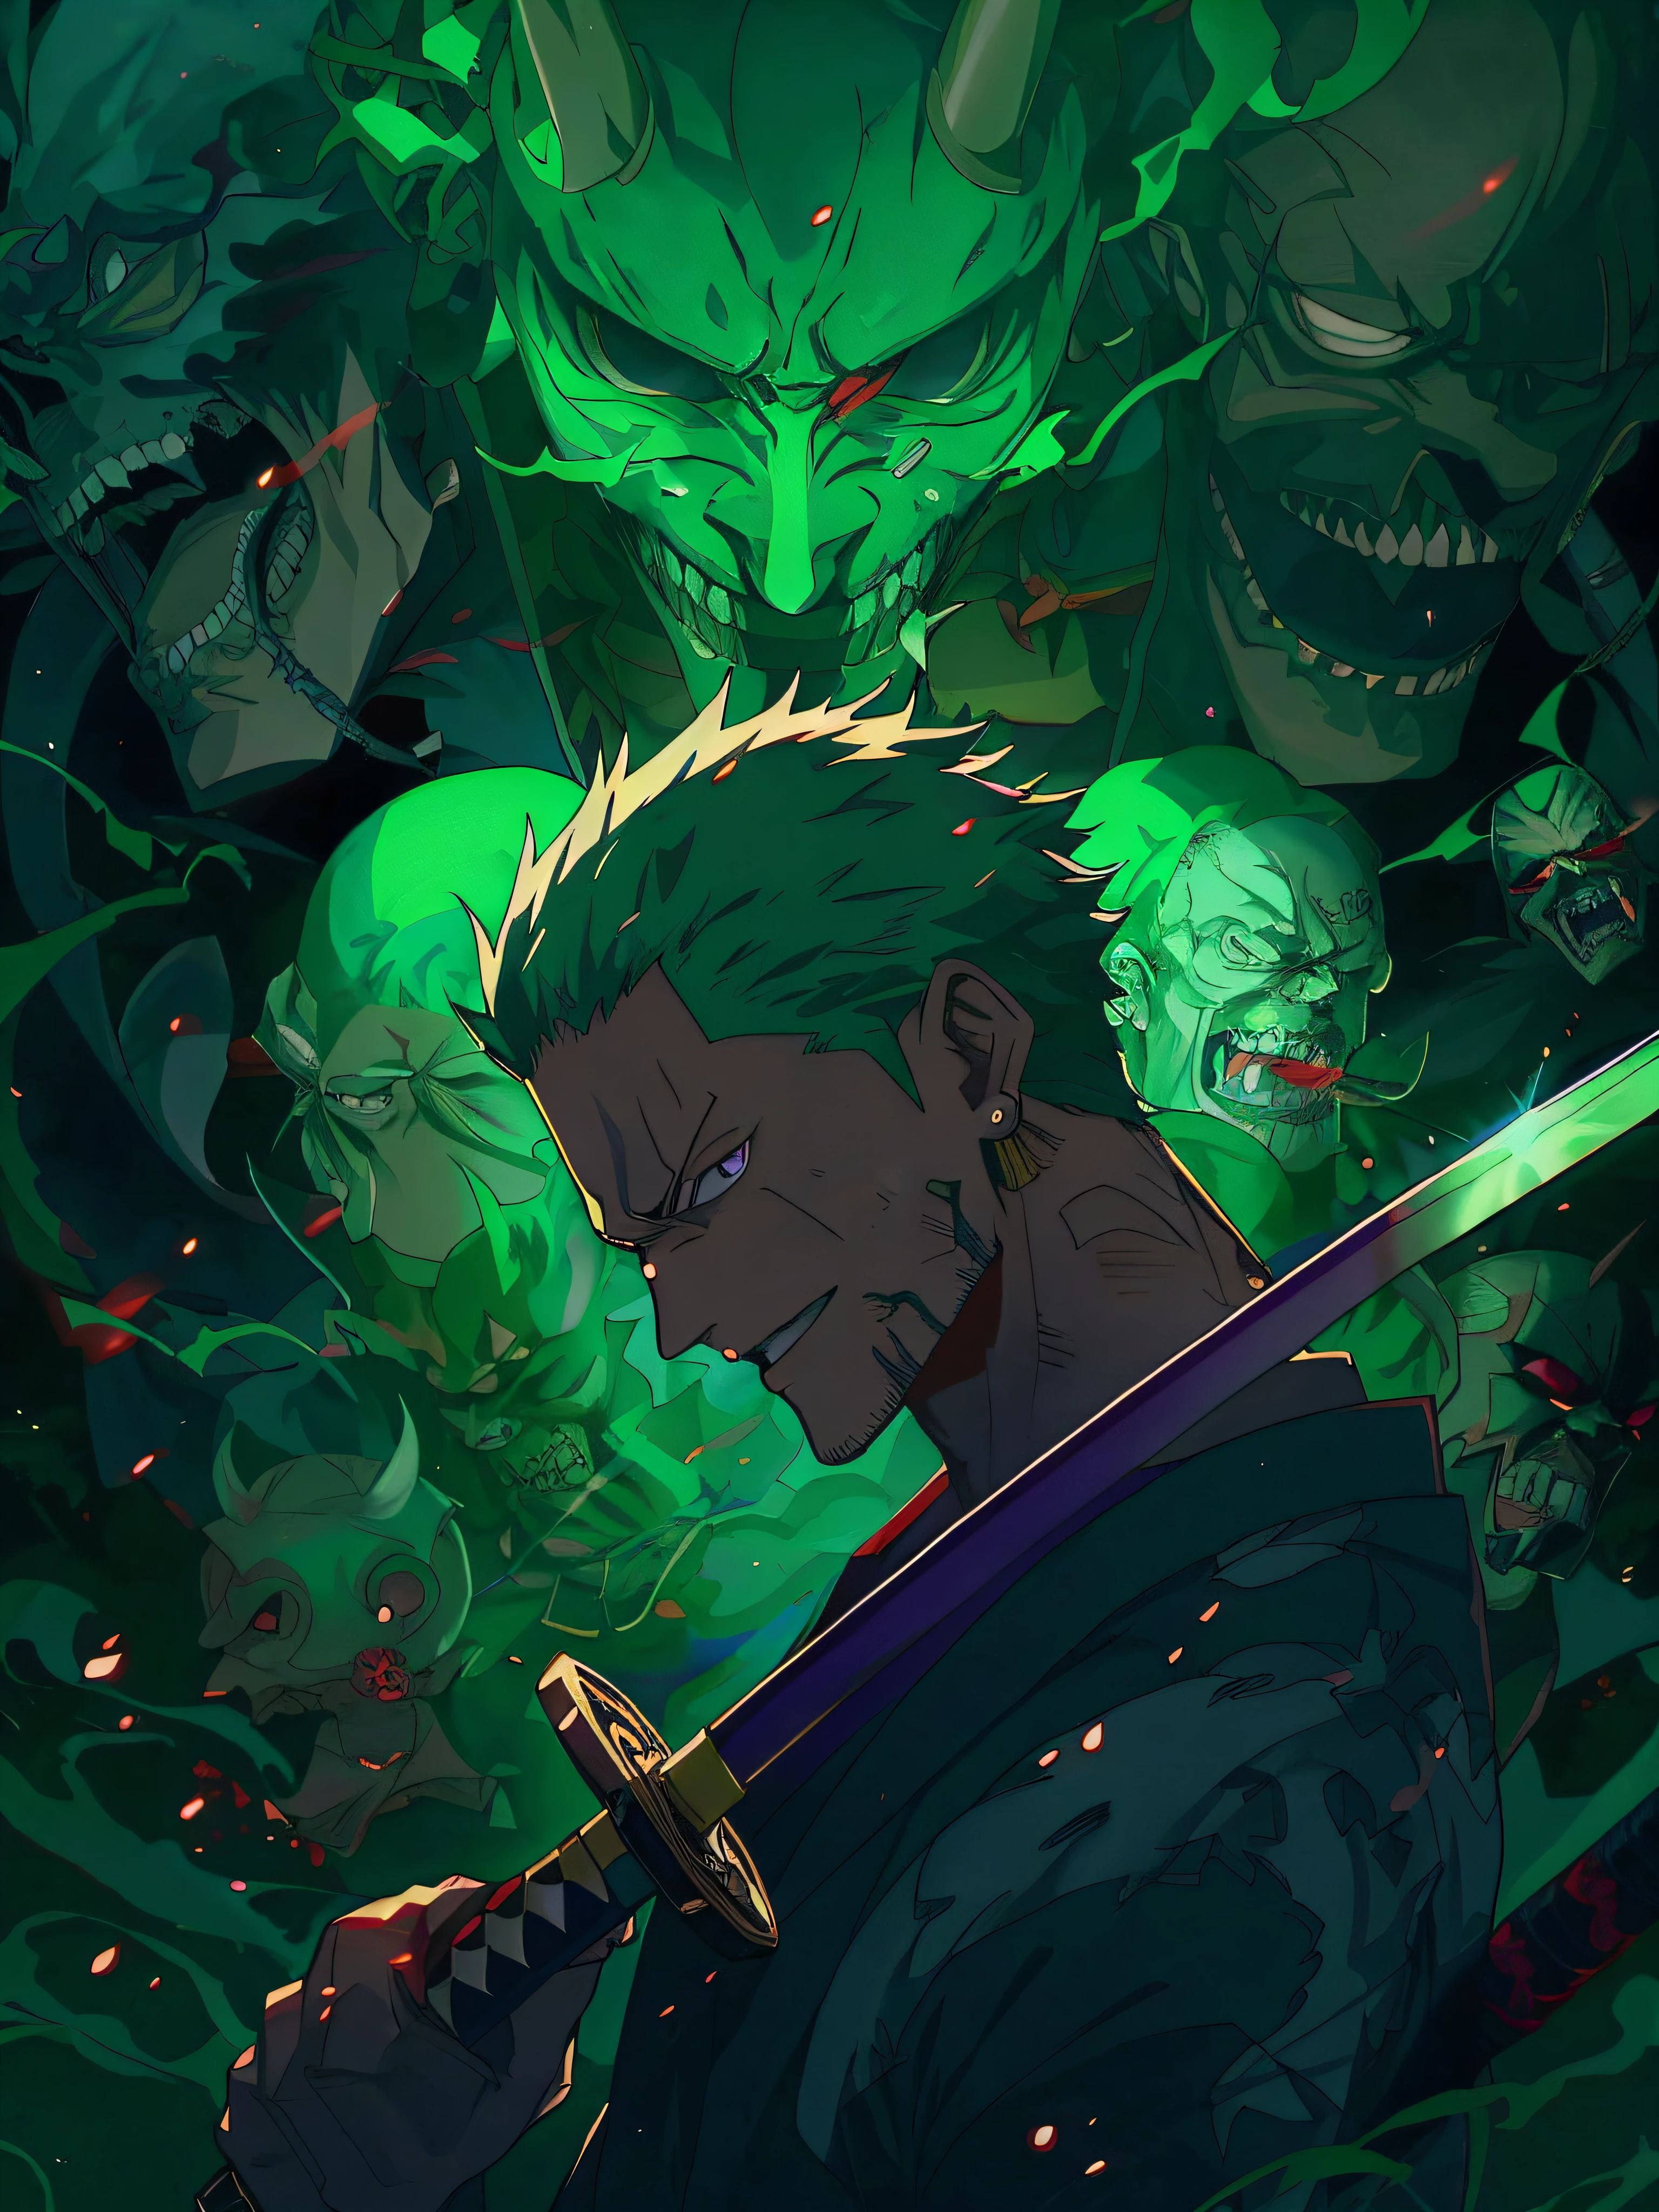 anime character with green hair holding a sword surrounded by skulls, roronoa zoro, badass anime 8 k, anime epic artwork, demon slayer artstyle, anime art wallpaper 4 k, anime art wallpaper 4k, 4k anime wallpaper, anime wallpaper 4 k, anime wallpaper 4k, anime art wallpaper 8 k, 4 k manga wallpaper, anime wallaper